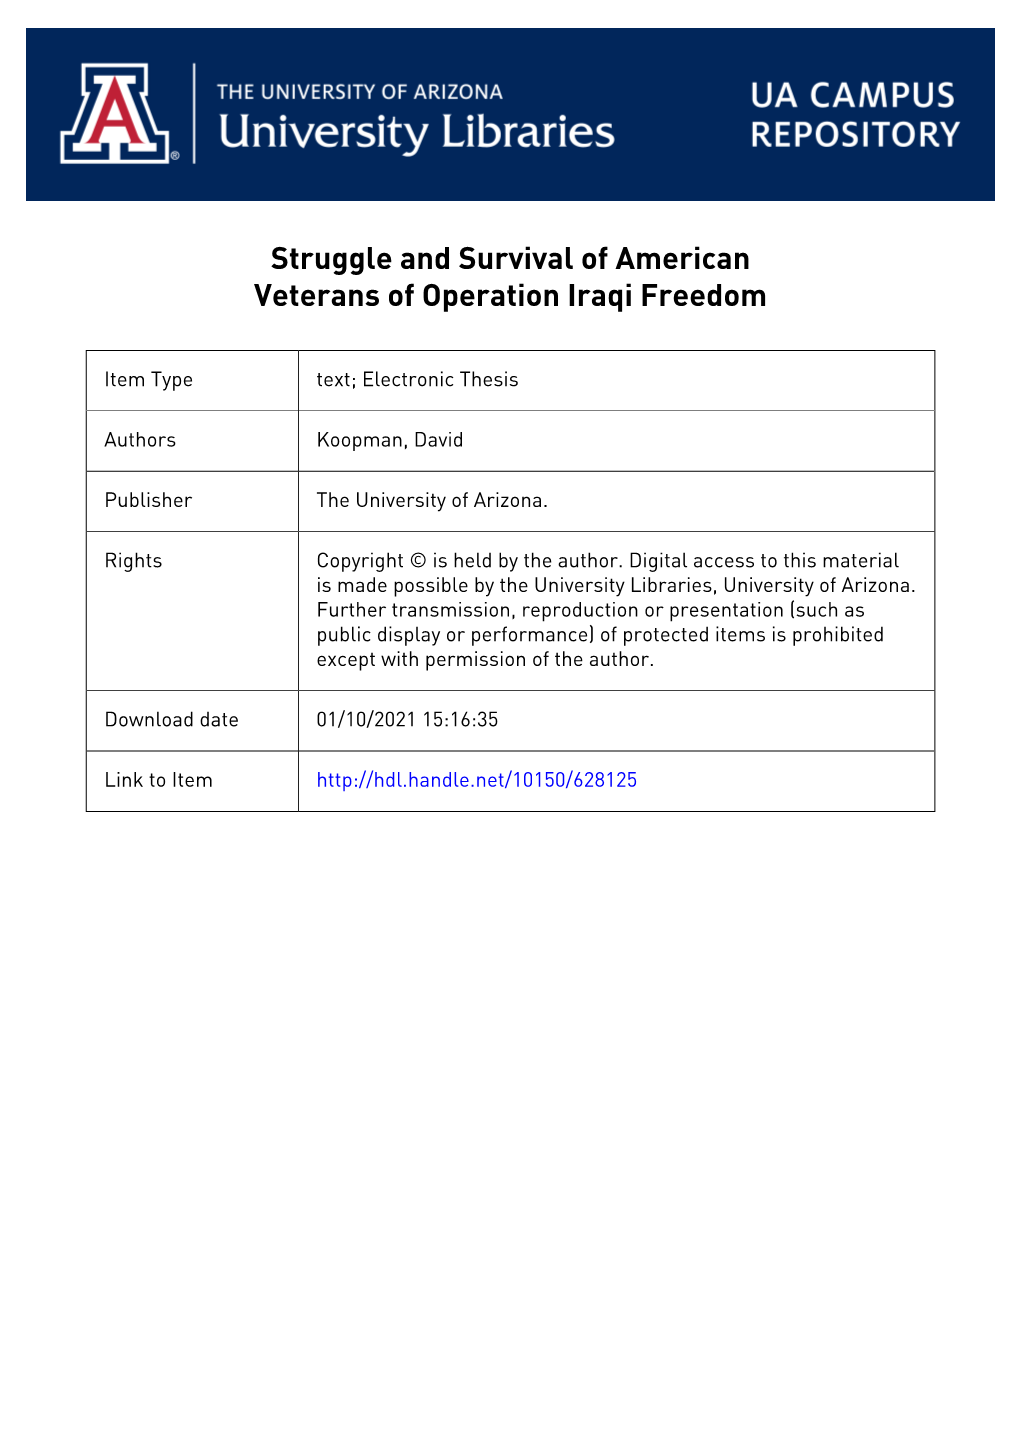 Struggle and Survival of American Veterans of Operation Iraqi Freedom